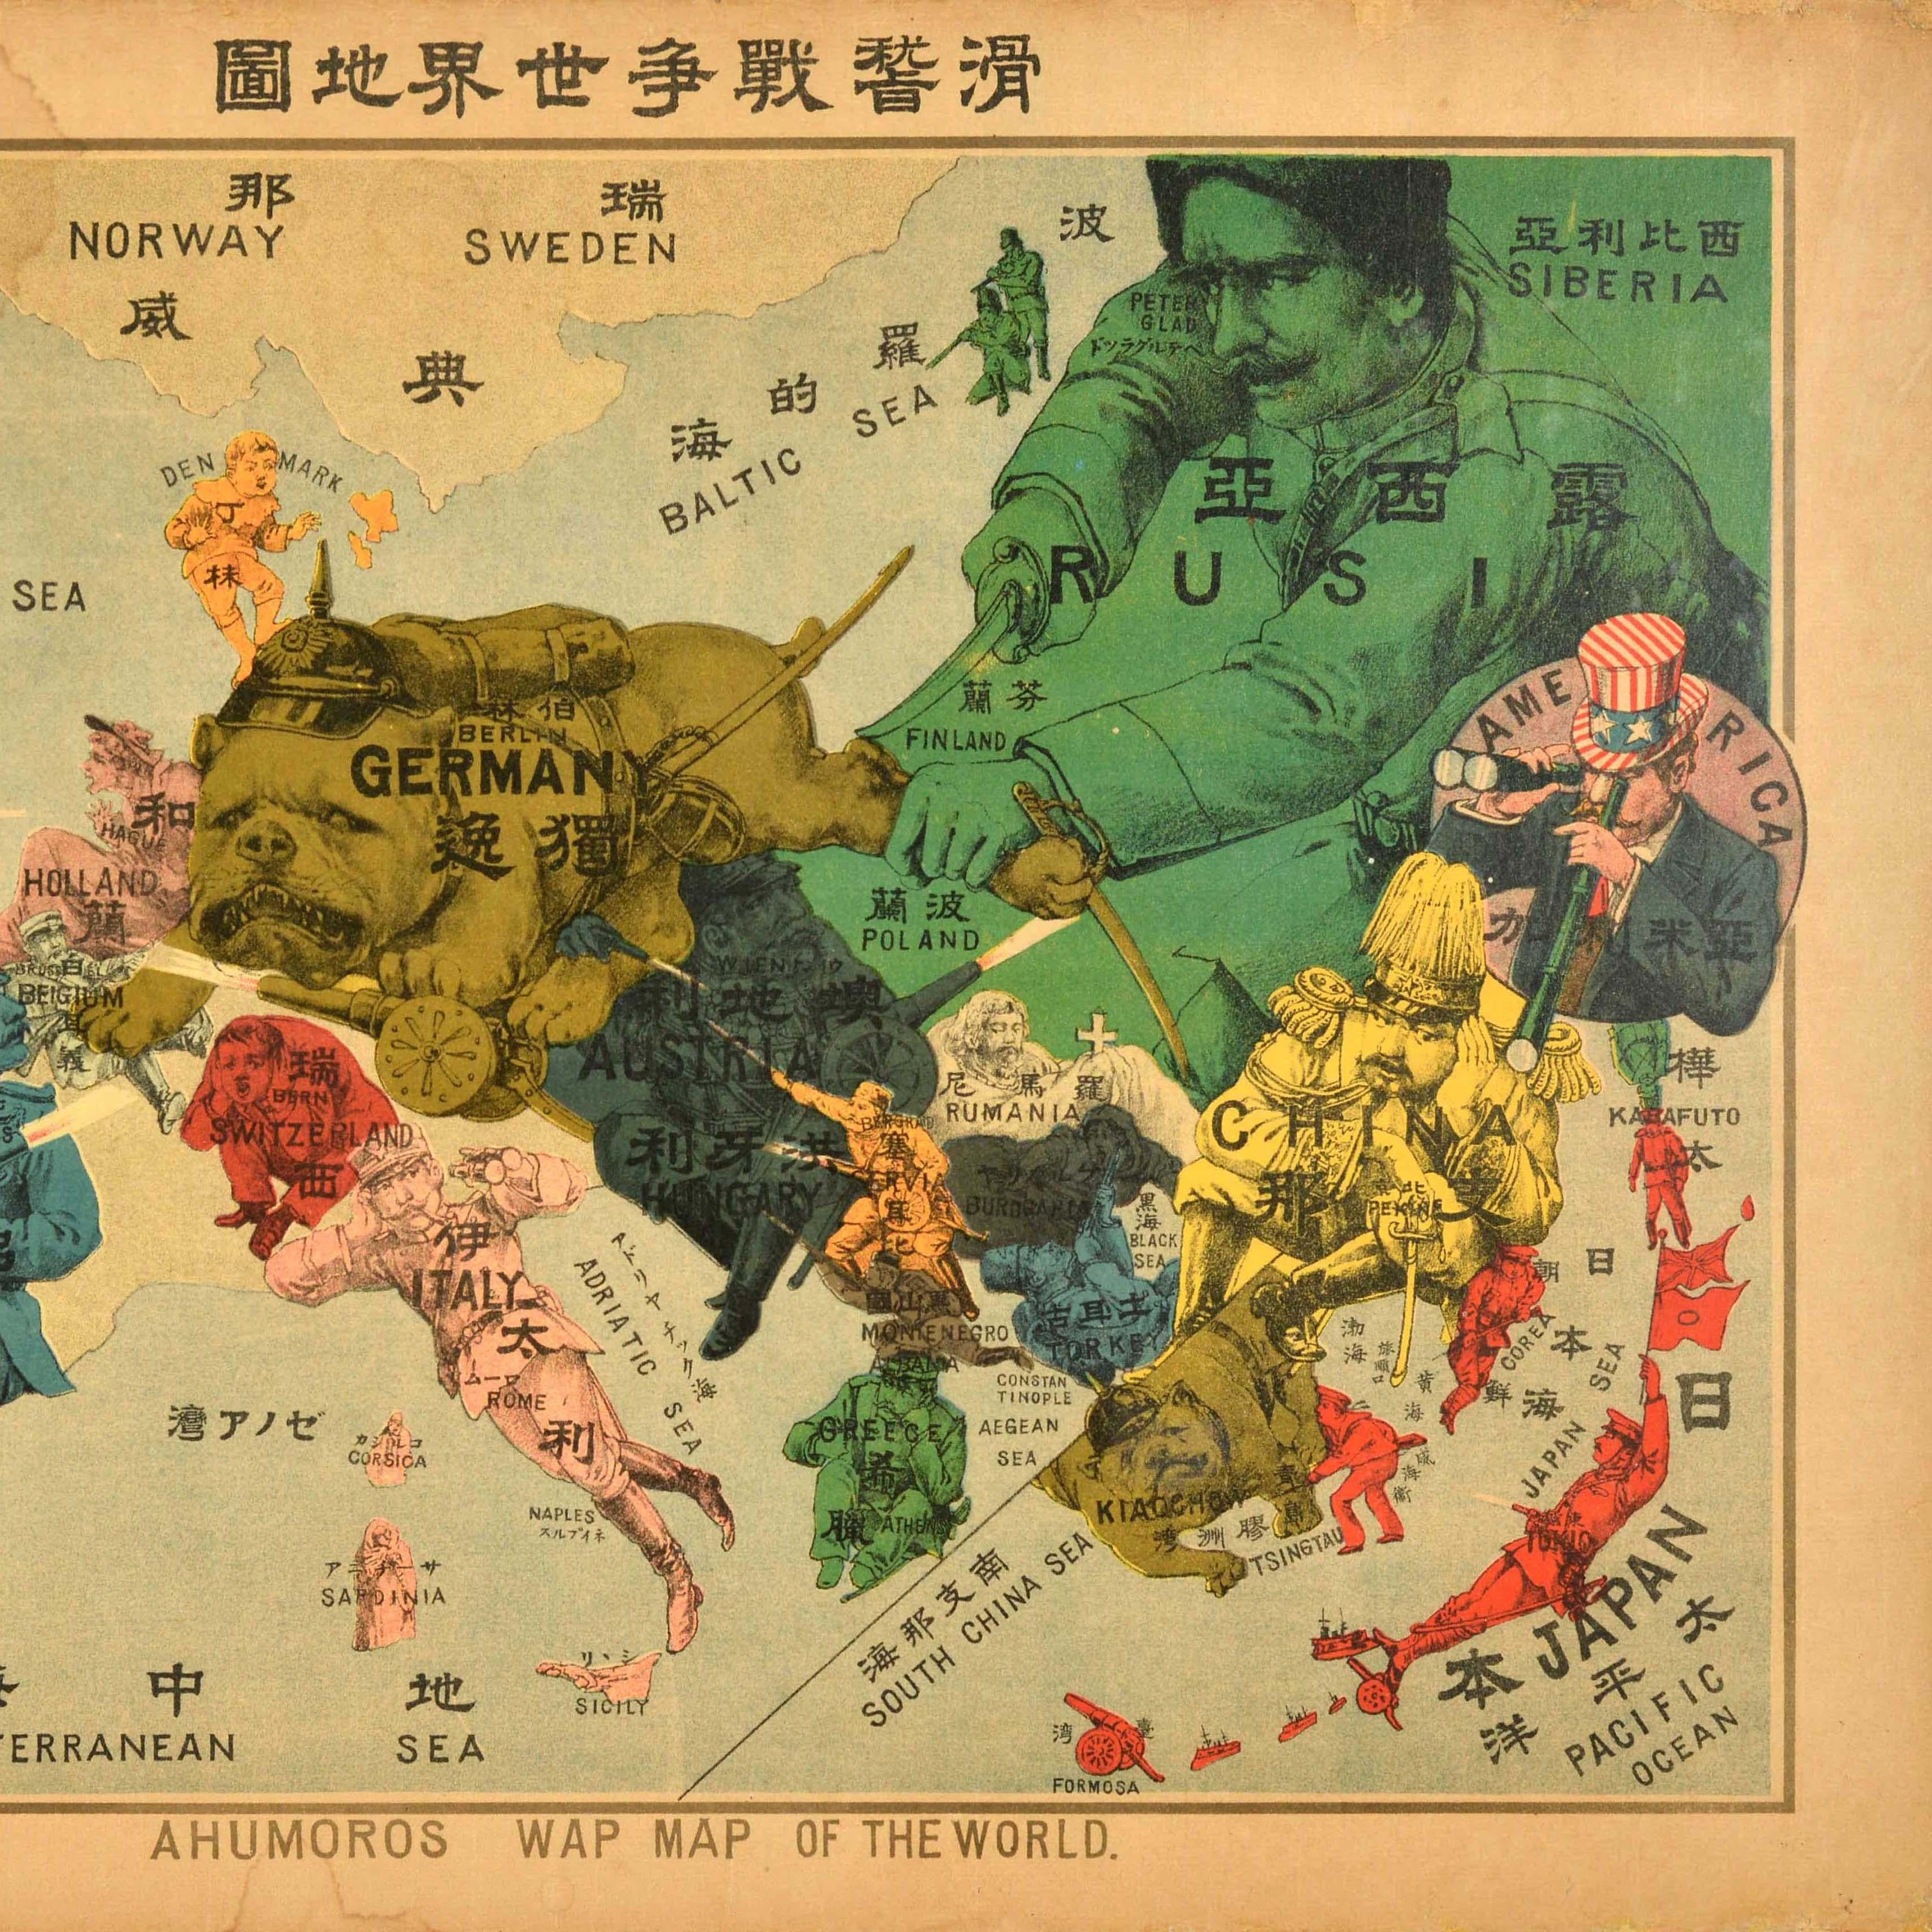 Original Antique World War One Humoros Wap Map Of The World WWI Japan Caricature For Sale 1